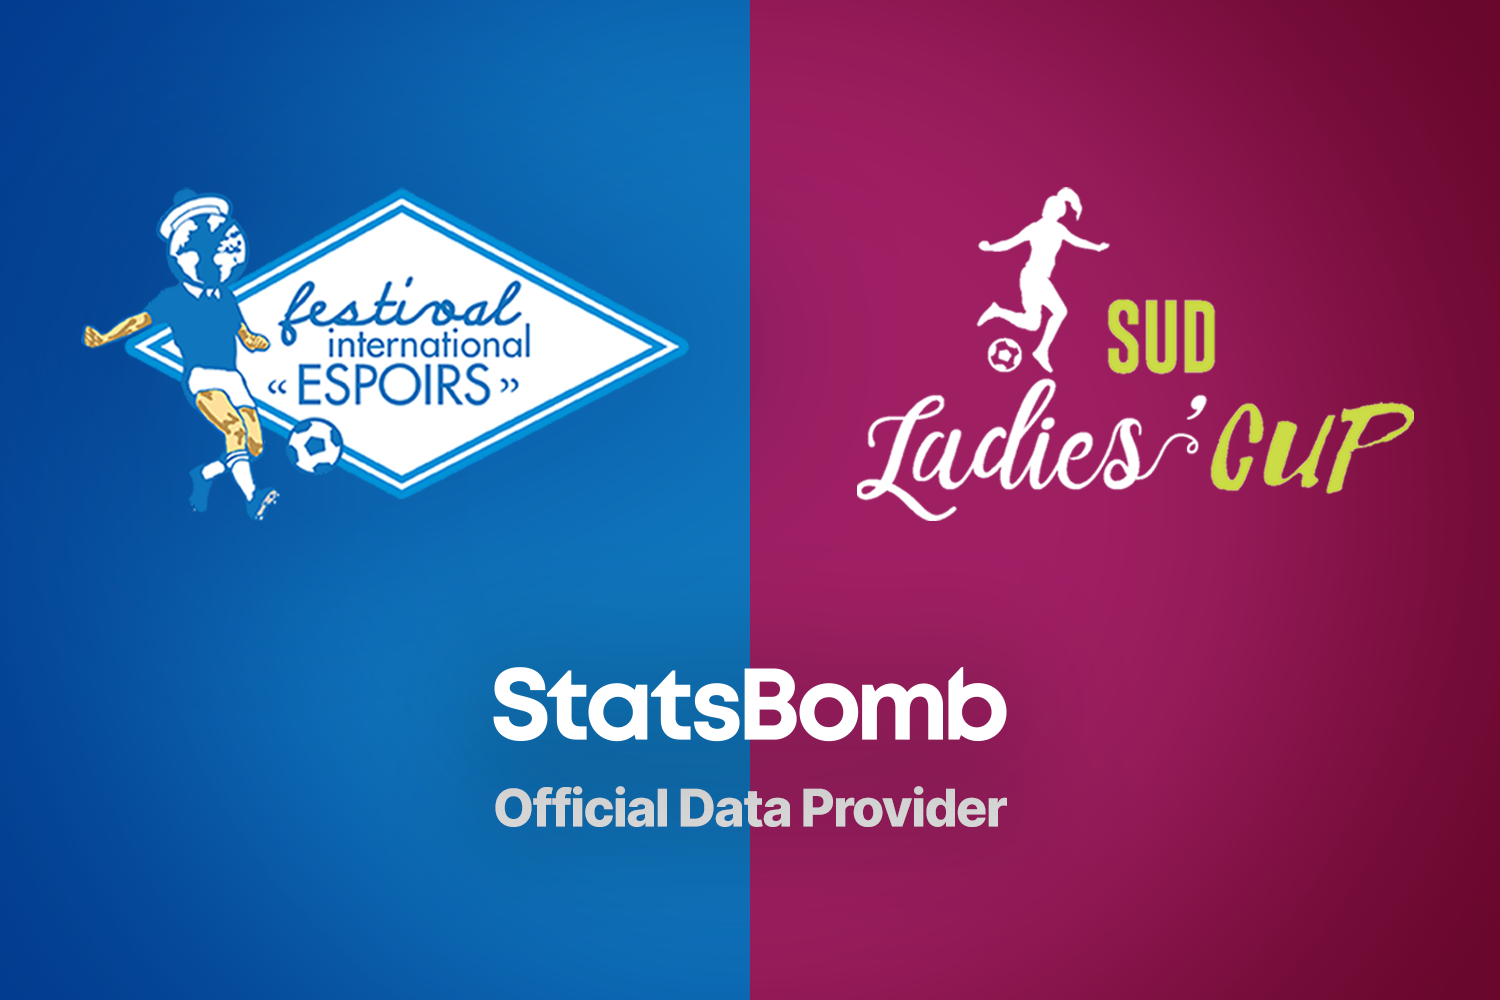 StatsBomb Named Official Data Provider For The Tournoi Maurice Revello and The Sud Ladies’ Cup